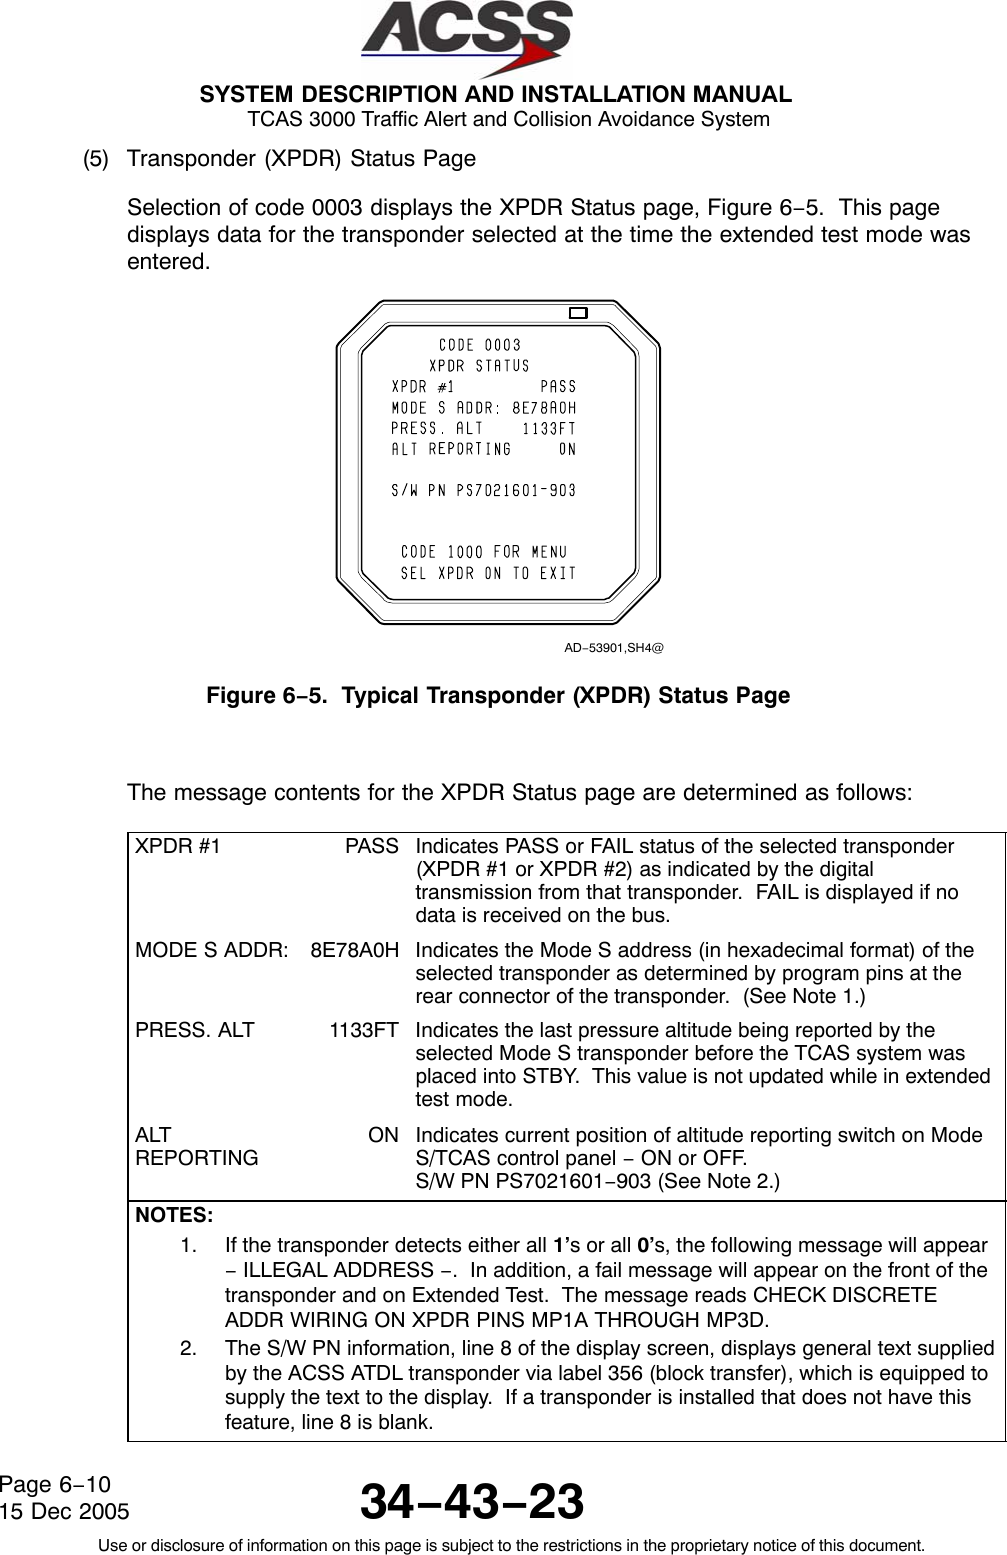  SYSTEM DESCRIPTION AND INSTALLATION MANUAL TCAS 3000 Traffic Alert and Collision Avoidance System34−43−23Use or disclosure of information on this page is subject to the restrictions in the proprietary notice of this document.Page 6−1015 Dec 2005(5) Transponder (XPDR) Status PageSelection of code 0003 displays the XPDR Status page, Figure 6−5.  This pagedisplays data for the transponder selected at the time the extended test mode wasentered.AD−53901,SH4@Figure 6−5.  Typical Transponder (XPDR) Status PageThe message contents for the XPDR Status page are determined as follows:XPDR #1 PASS Indicates PASS or FAIL status of the selected transponder(XPDR #1 or XPDR #2) as indicated by the digitaltransmission from that transponder.  FAIL is displayed if nodata is received on the bus.MODE S ADDR: 8E78A0H Indicates the Mode S address (in hexadecimal format) of theselected transponder as determined by program pins at therear connector of the transponder.  (See Note 1.)PRESS. ALT 1133FT Indicates the last pressure altitude being reported by theselected Mode S transponder before the TCAS system wasplaced into STBY.  This value is not updated while in extendedtest mode.ALTREPORTINGON Indicates current position of altitude reporting switch on ModeS/TCAS control panel − ON or OFF.S/W PN PS7021601−903 (See Note 2.)NOTES:1. If the transponder detects either all 1’s or all 0’s, the following message will appear− ILLEGAL ADDRESS −.  In addition, a fail message will appear on the front of thetransponder and on Extended Test.  The message reads CHECK DISCRETEADDR WIRING ON XPDR PINS MP1A THROUGH MP3D.2. The S/W PN information, line 8 of the display screen, displays general text suppliedby the ACSS ATDL transponder via label 356 (block transfer), which is equipped tosupply the text to the display.  If a transponder is installed that does not have thisfeature, line 8 is blank.